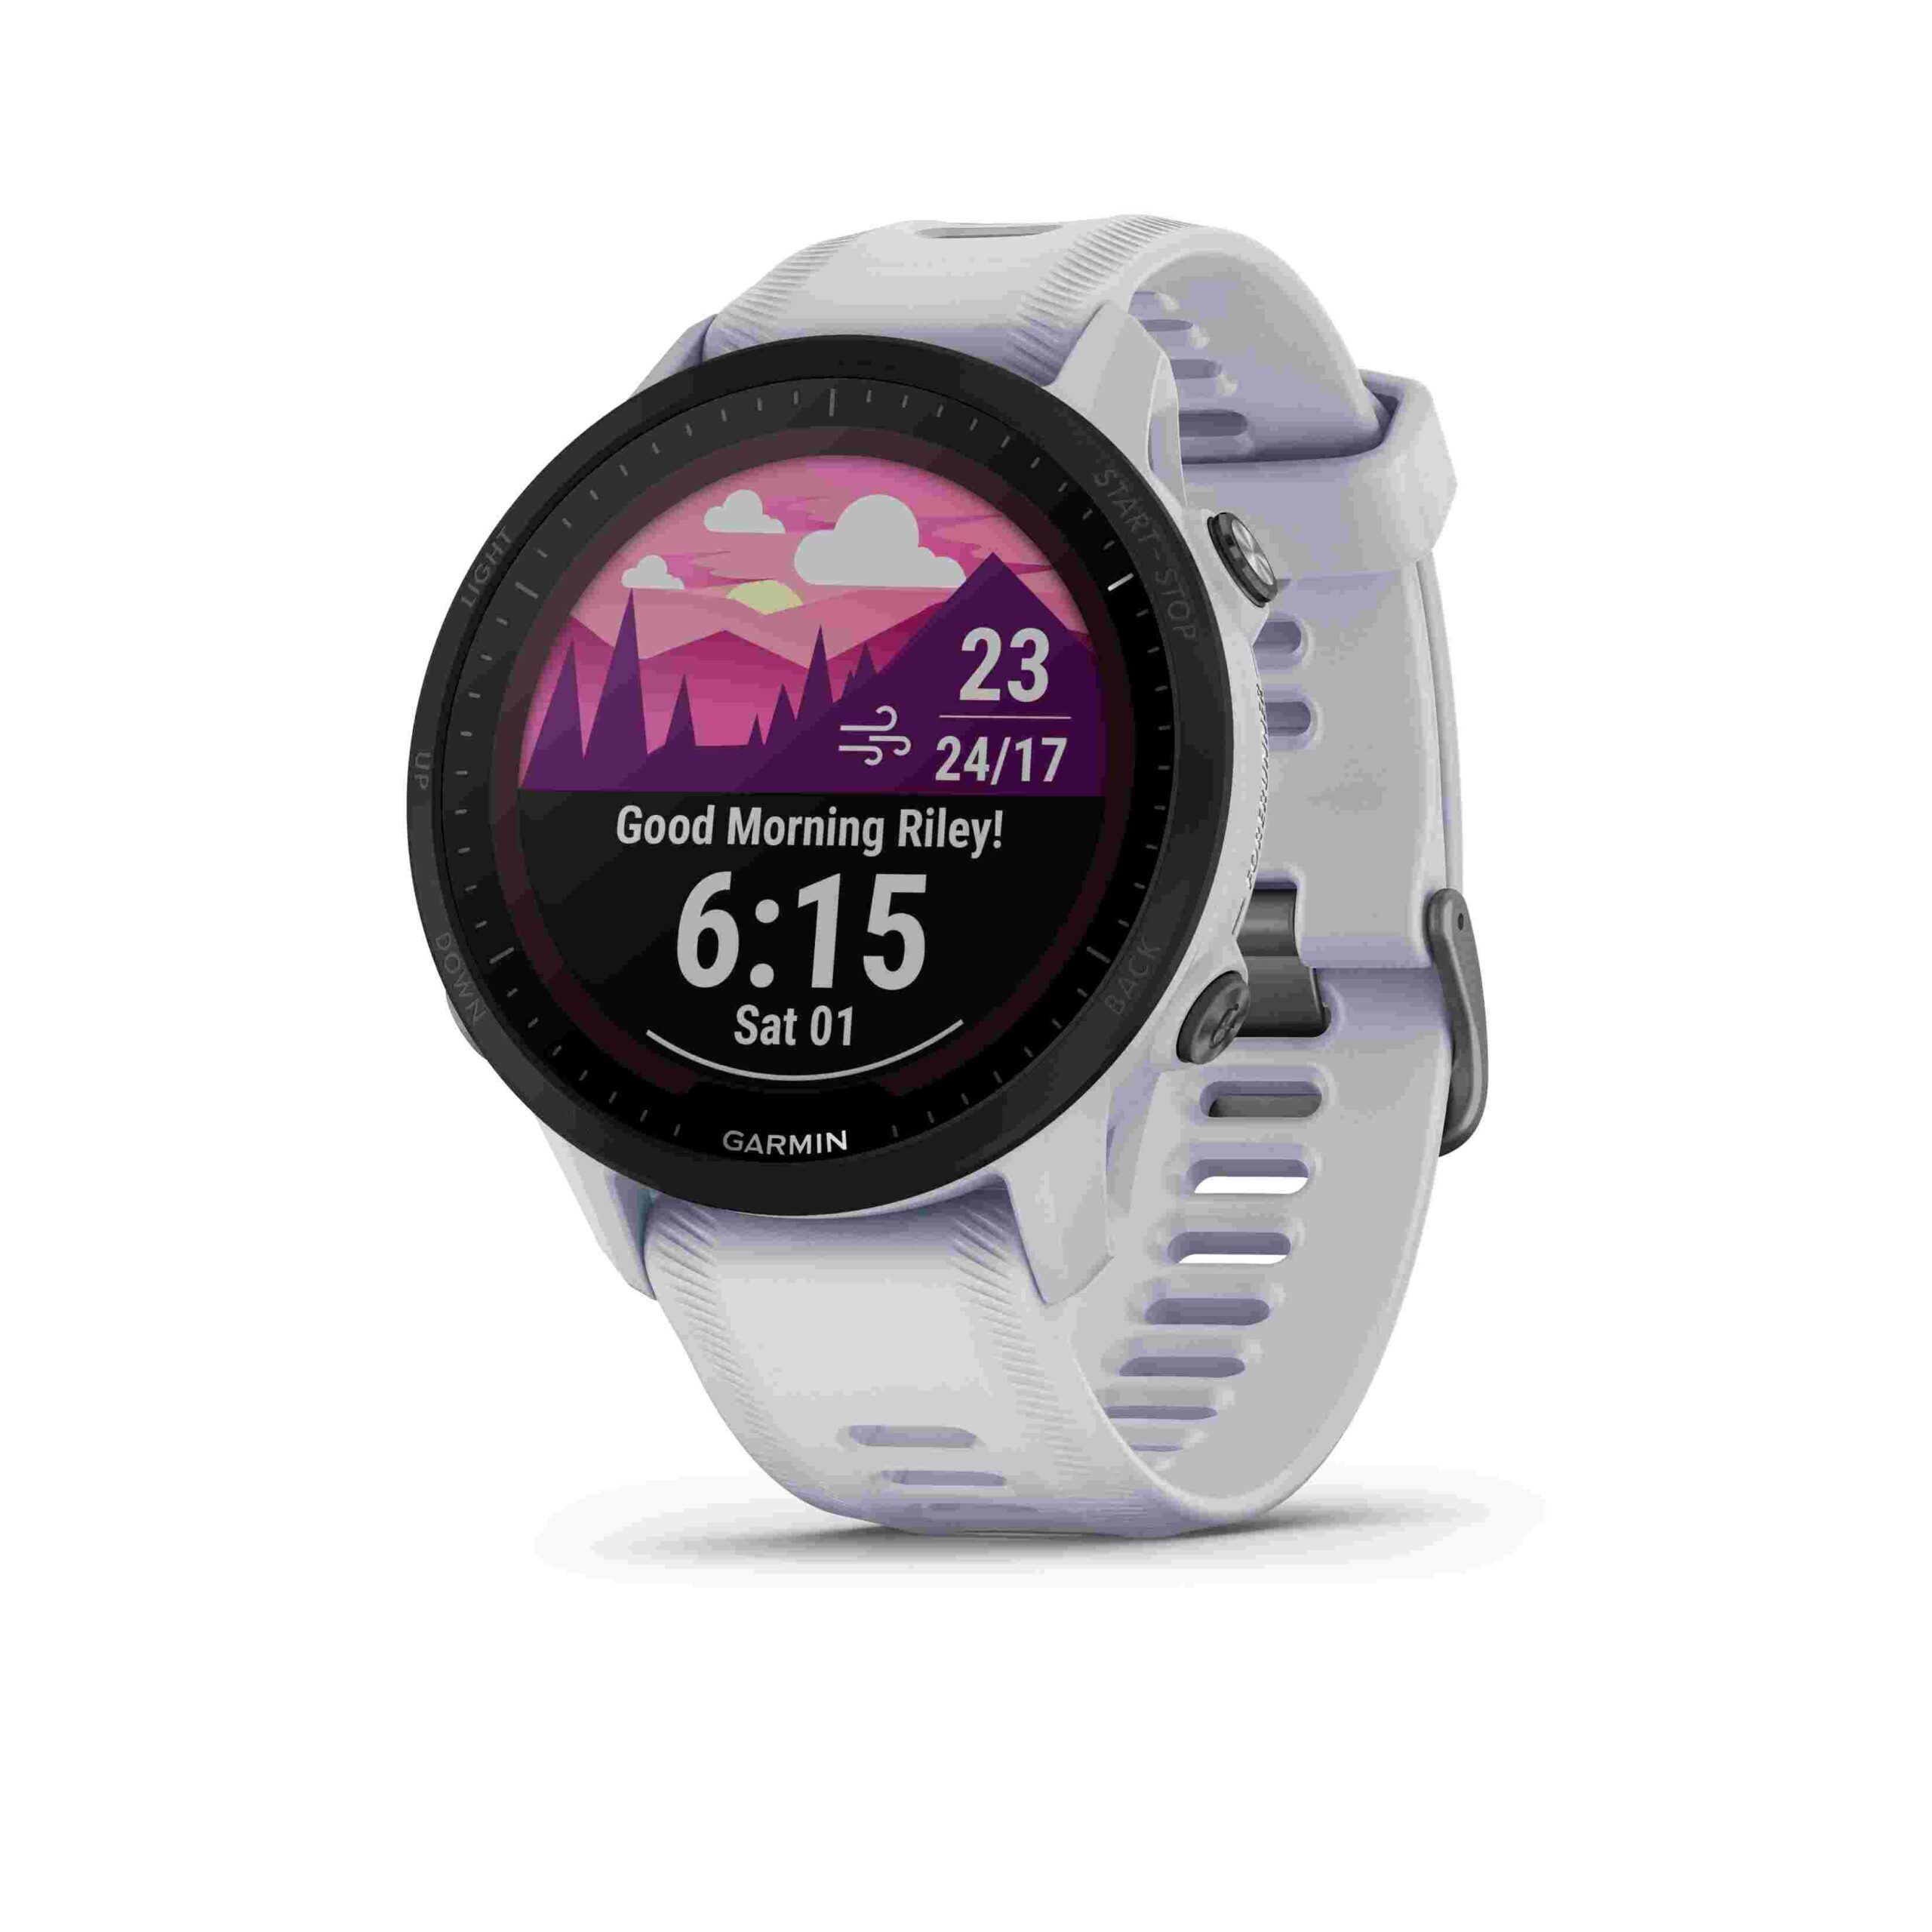 Garmin Malaysia Introduces Forerunner 255 and 955 Smartwatches